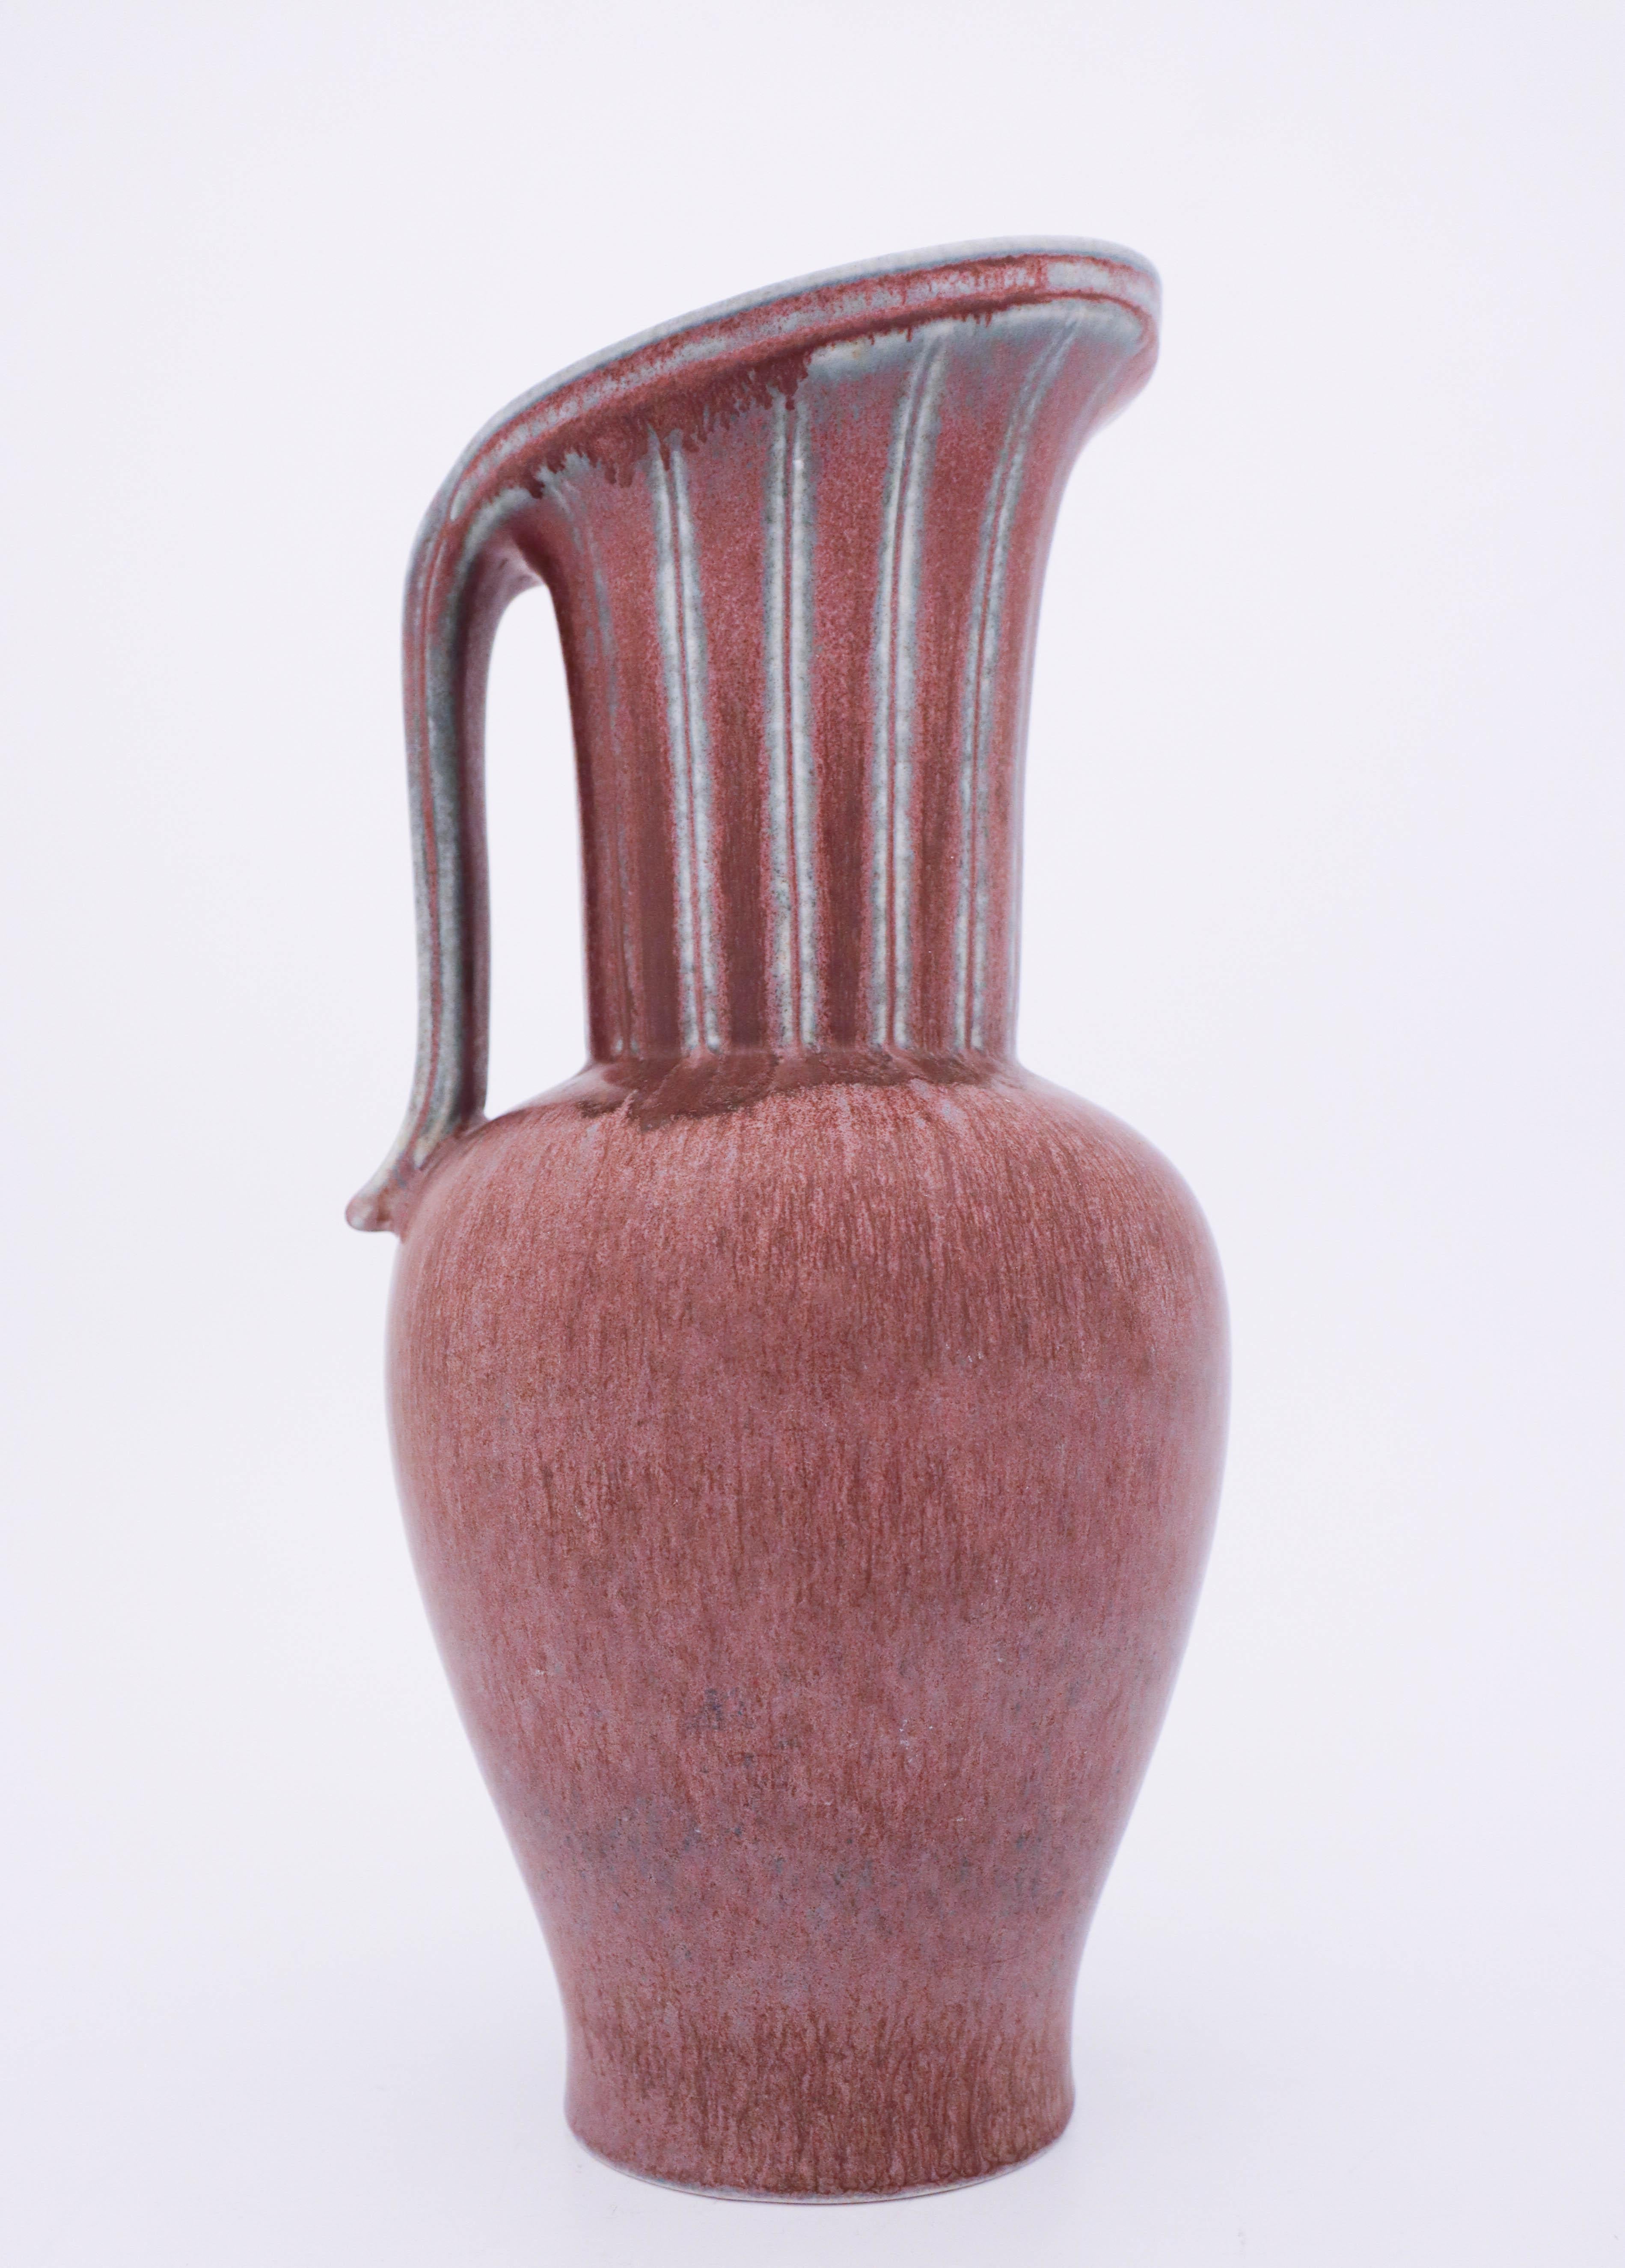 A vase designed by Gunnar Nylund at Rörstrand, the vase is 35 cm high and it is in mint condition.